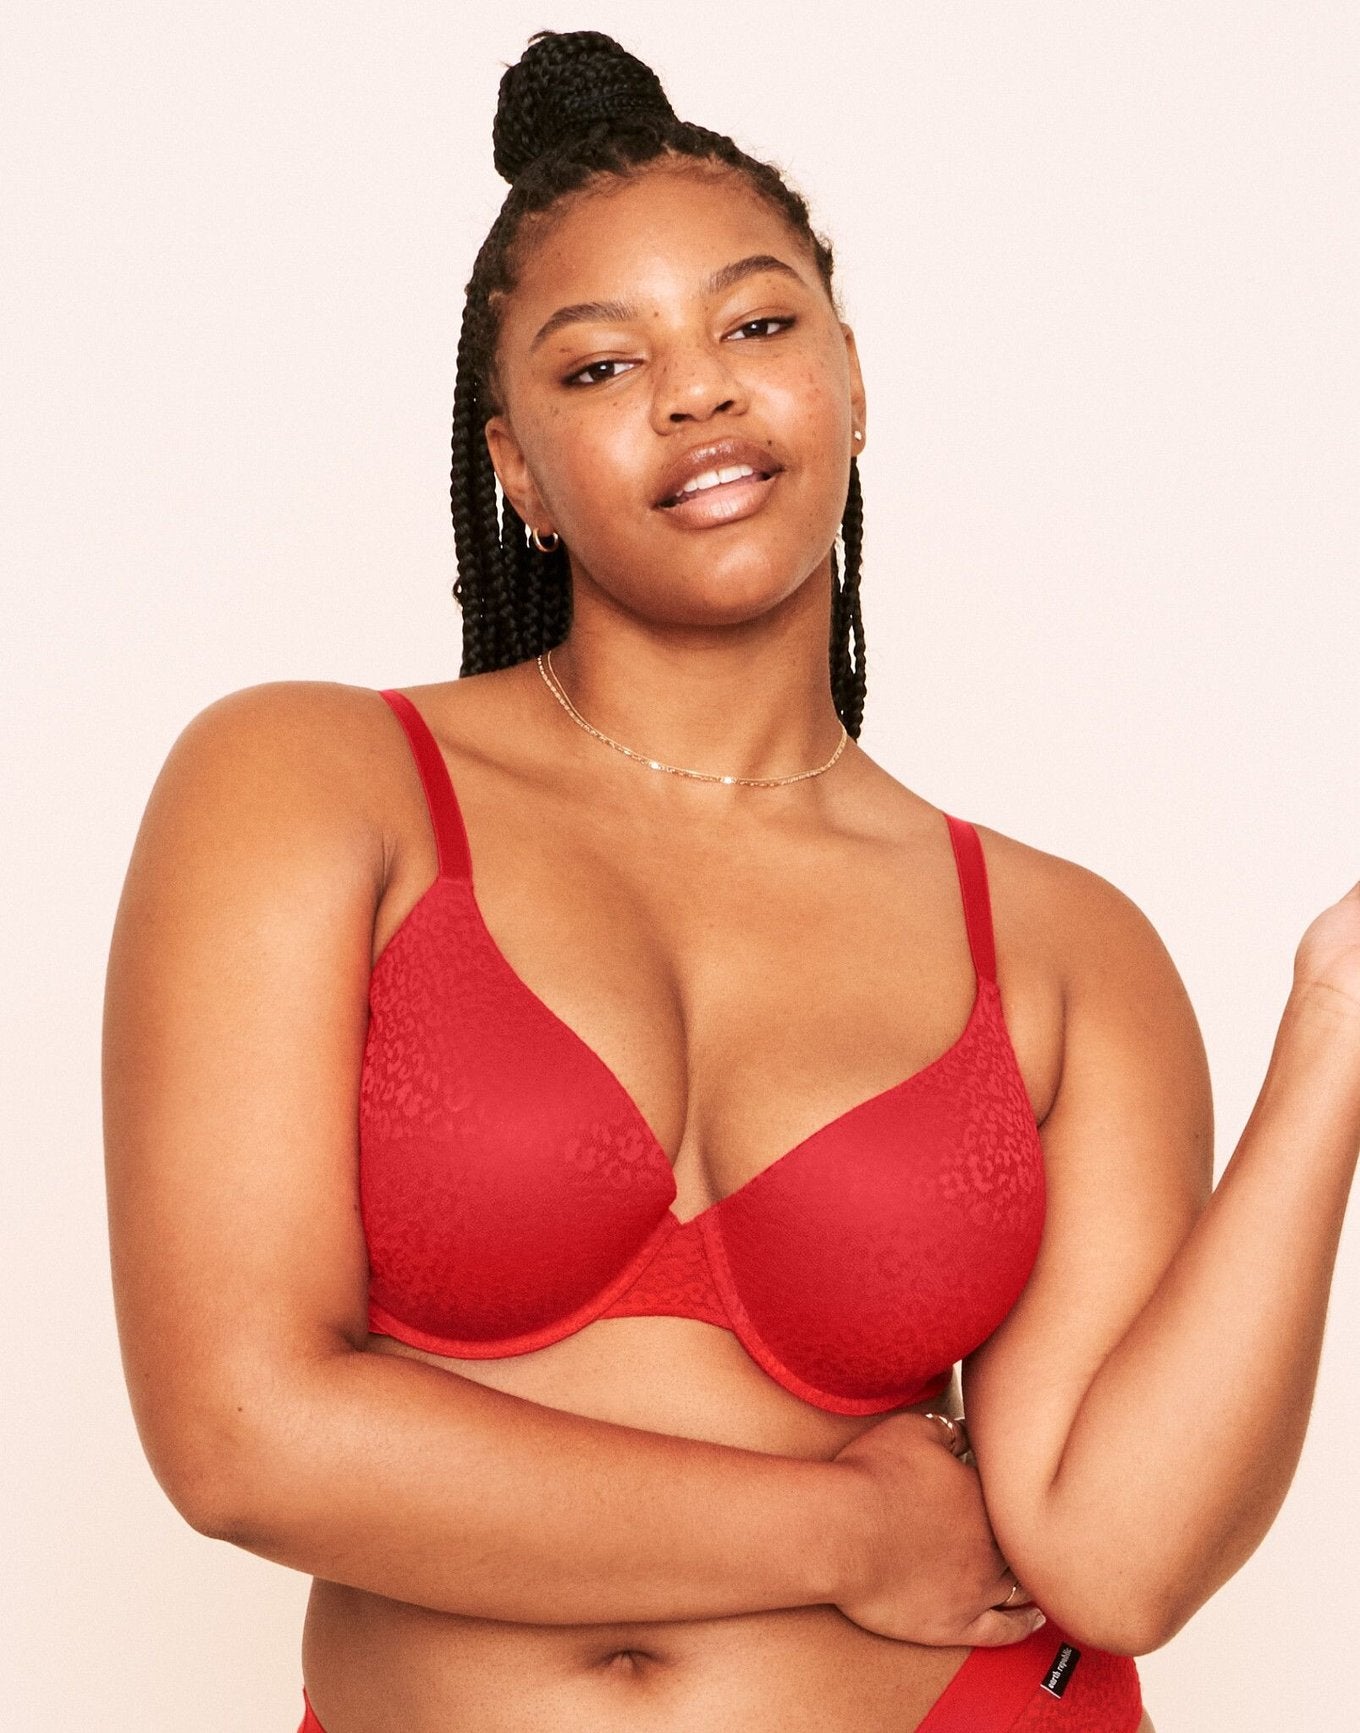 Earth Republic Kendall Lace Plunge Push Up Bra Lace Push-up Bra in color Flame Scarlet and shape plunge